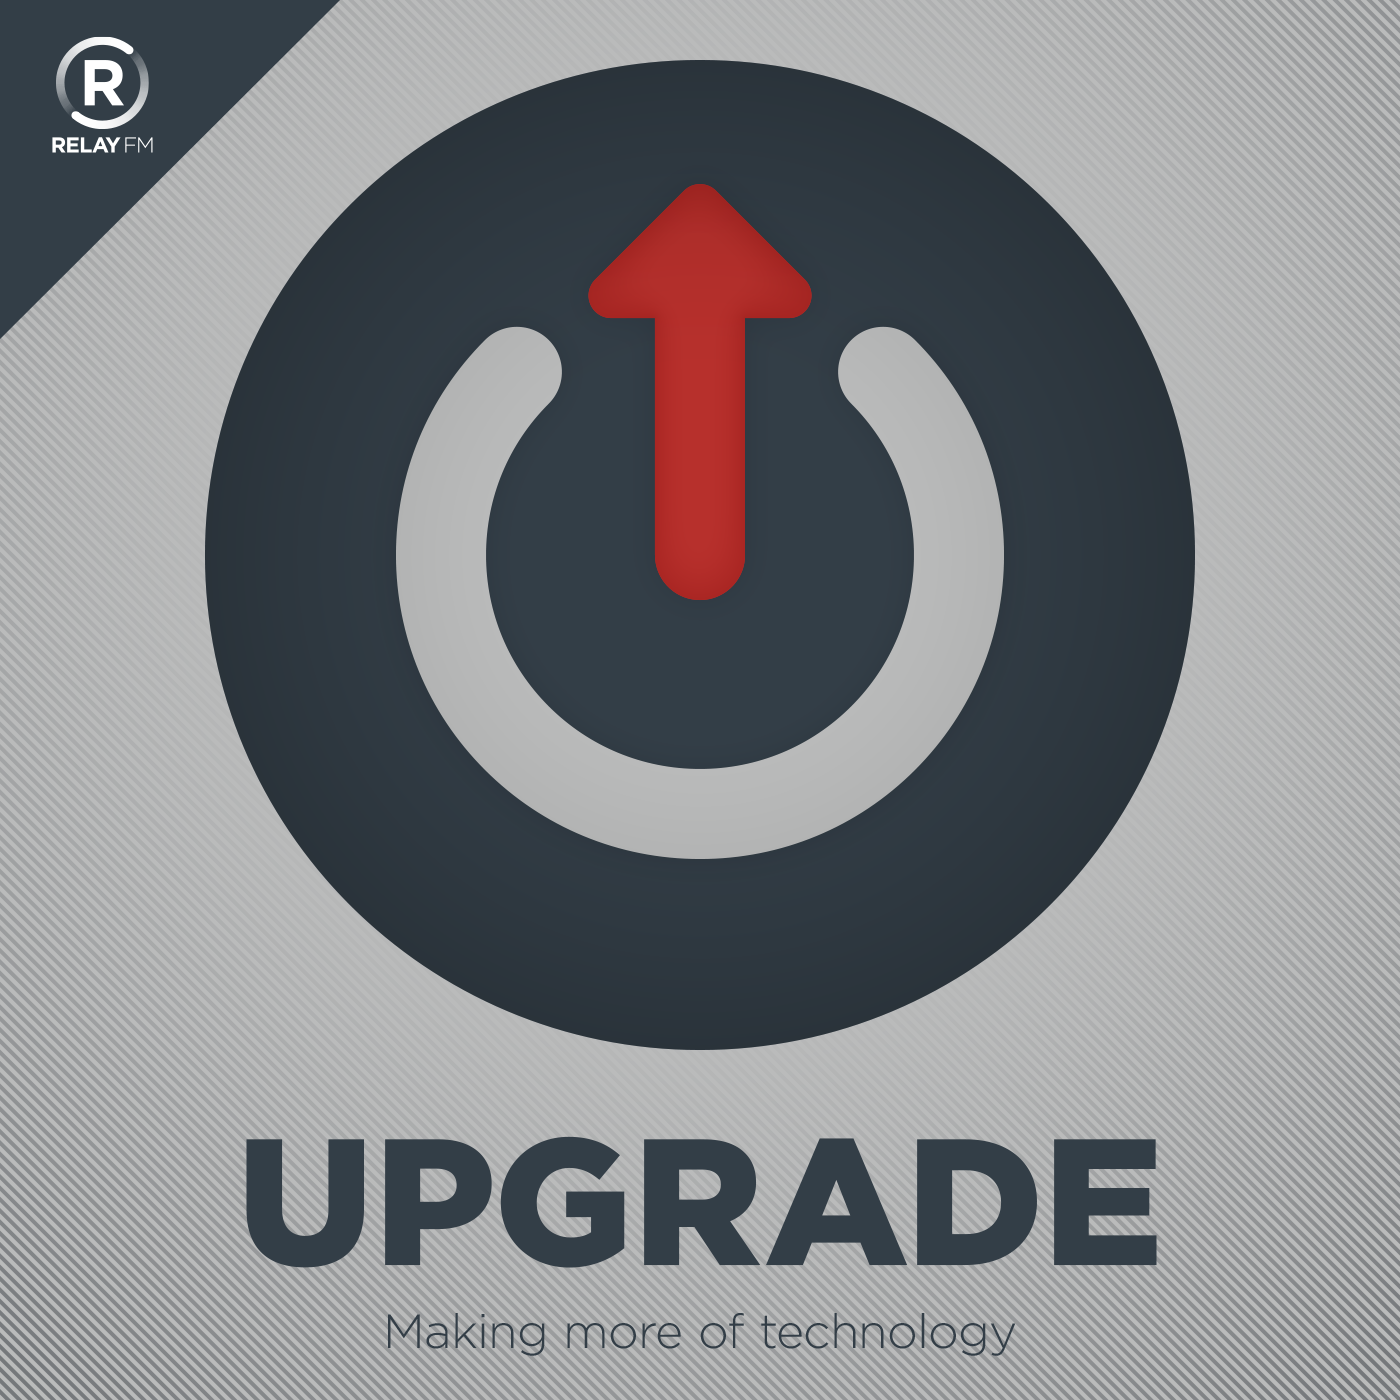 Upgrade podcast logo with a power on icon that also looks like a “U”.